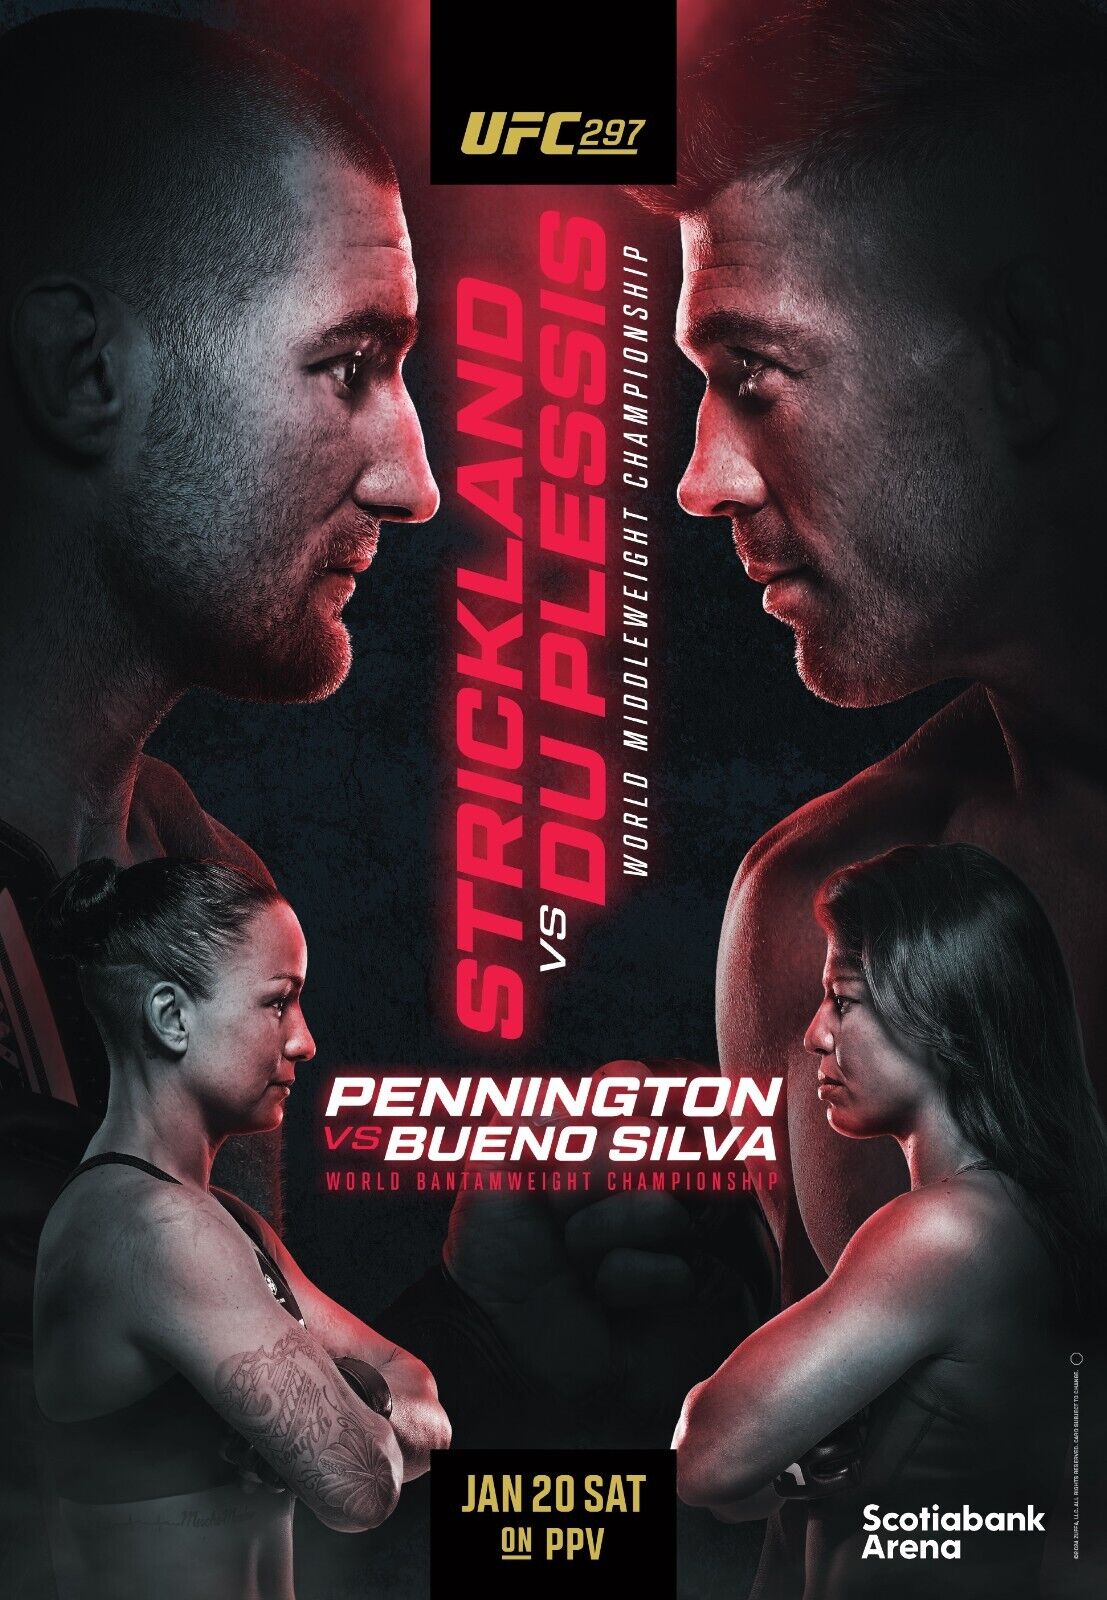 UFC 297 Fight Poster 11x17 Inches - Sean Strickland vs Dricus Du Plessis - NEW